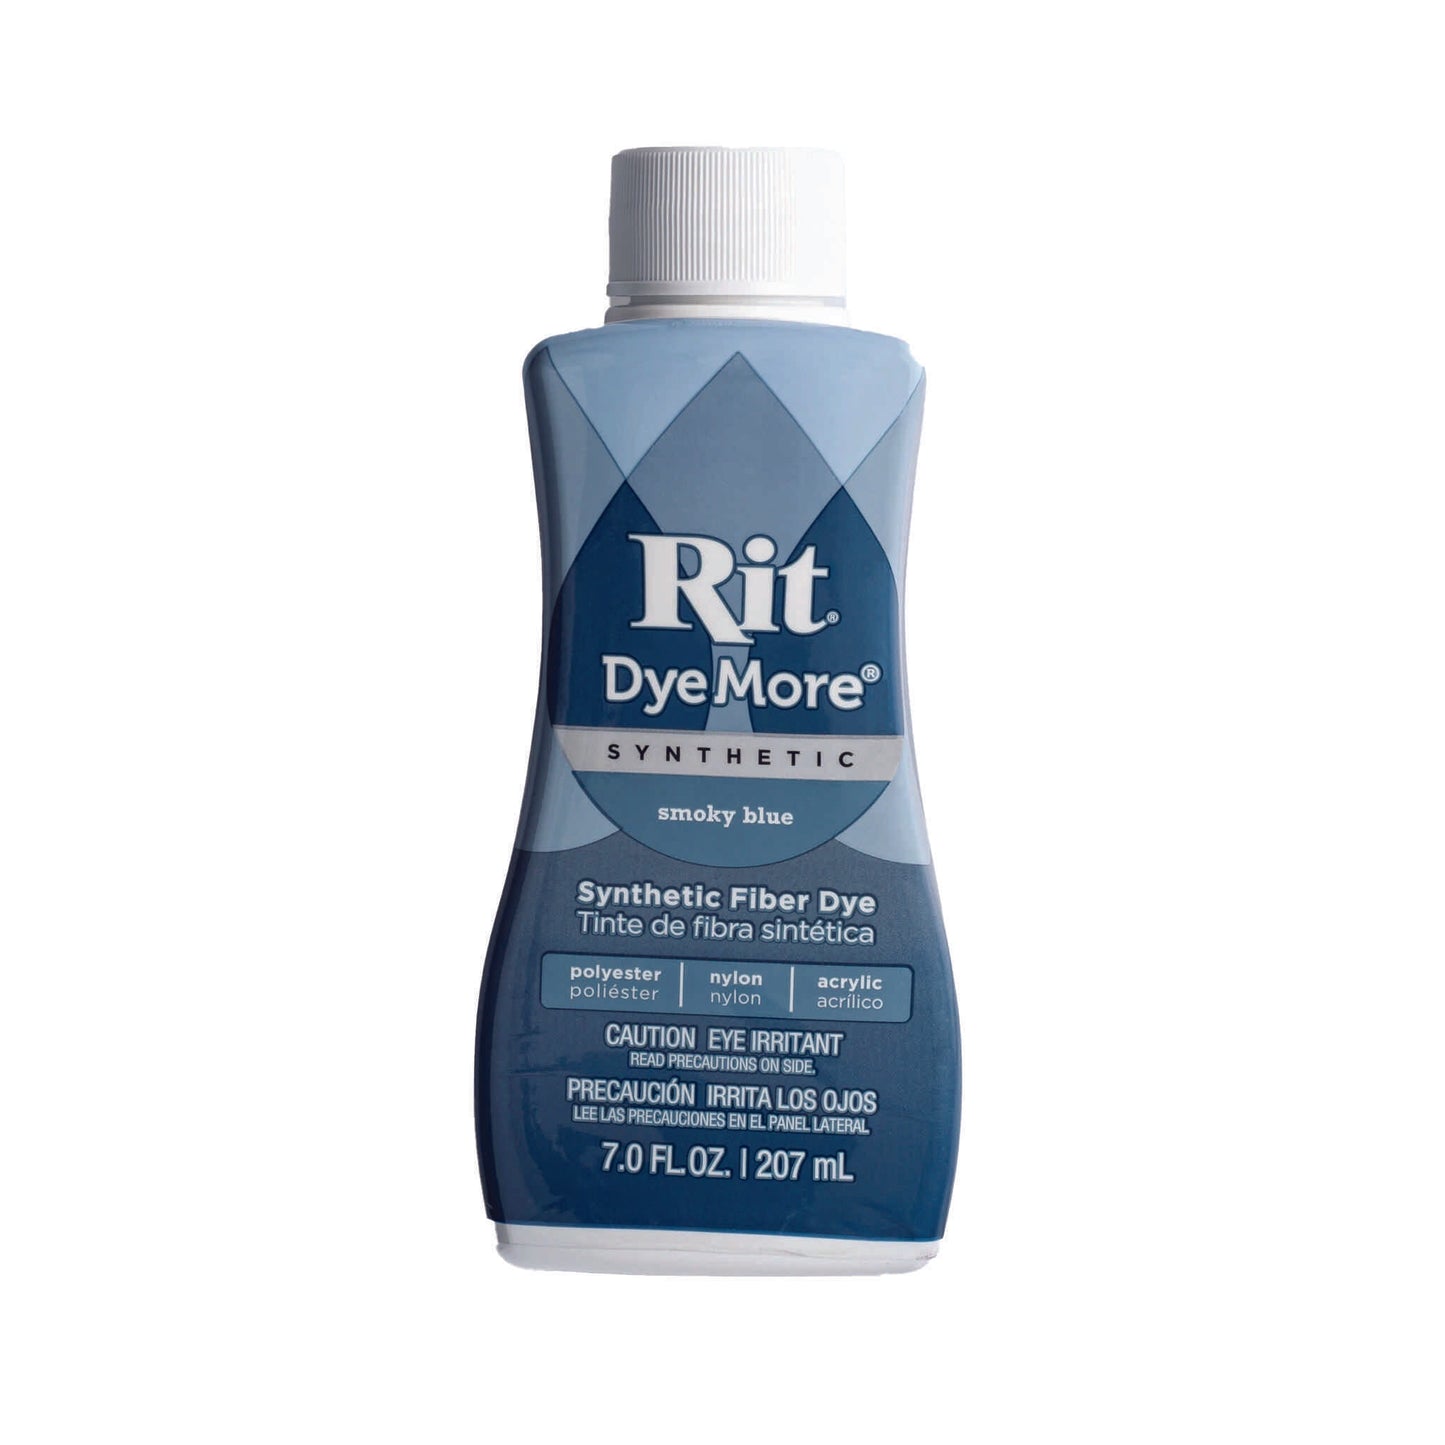 Smoky blue coloured Rit DyeMore synthetic fibre dye bottle on a white background.